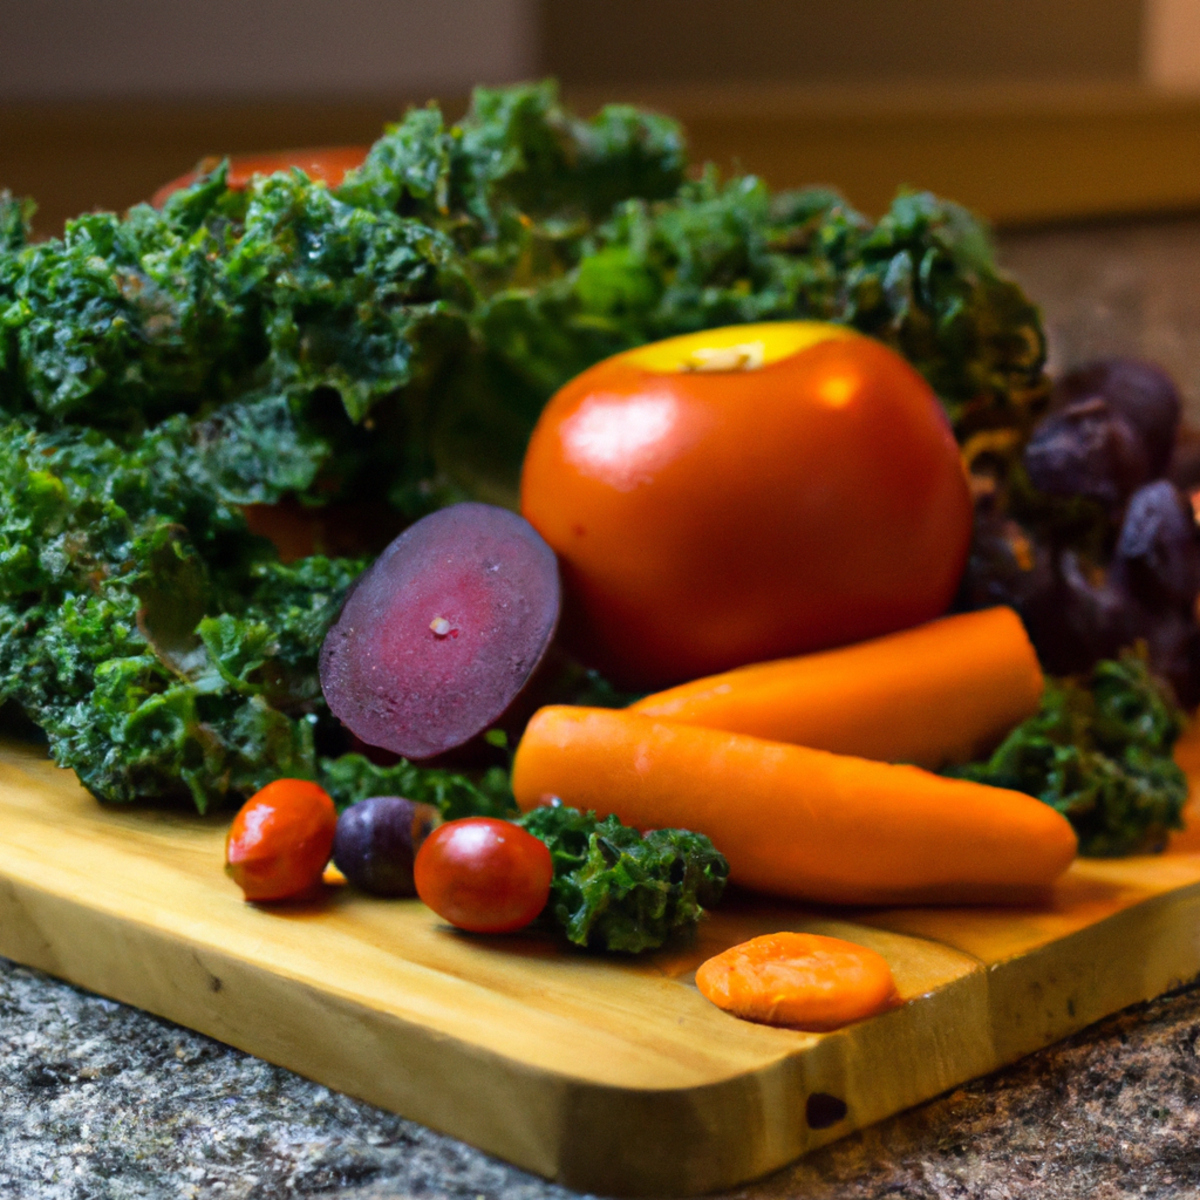 The photo shows a wooden cutting board with a variety of fresh, colorful fruits and vegetables arranged in an artful display. A bright red tomato, a bunch of leafy kale, a cluster of purple grapes, and a handful of bright orange carrots are just a few of the items on the board. The lighting is soft and natural, highlighting the vibrant colors and textures of the produce. In the background, a rustic kitchen with exposed brick walls and a vintage stove can be seen, adding to the organic and wholesome feel of the image.